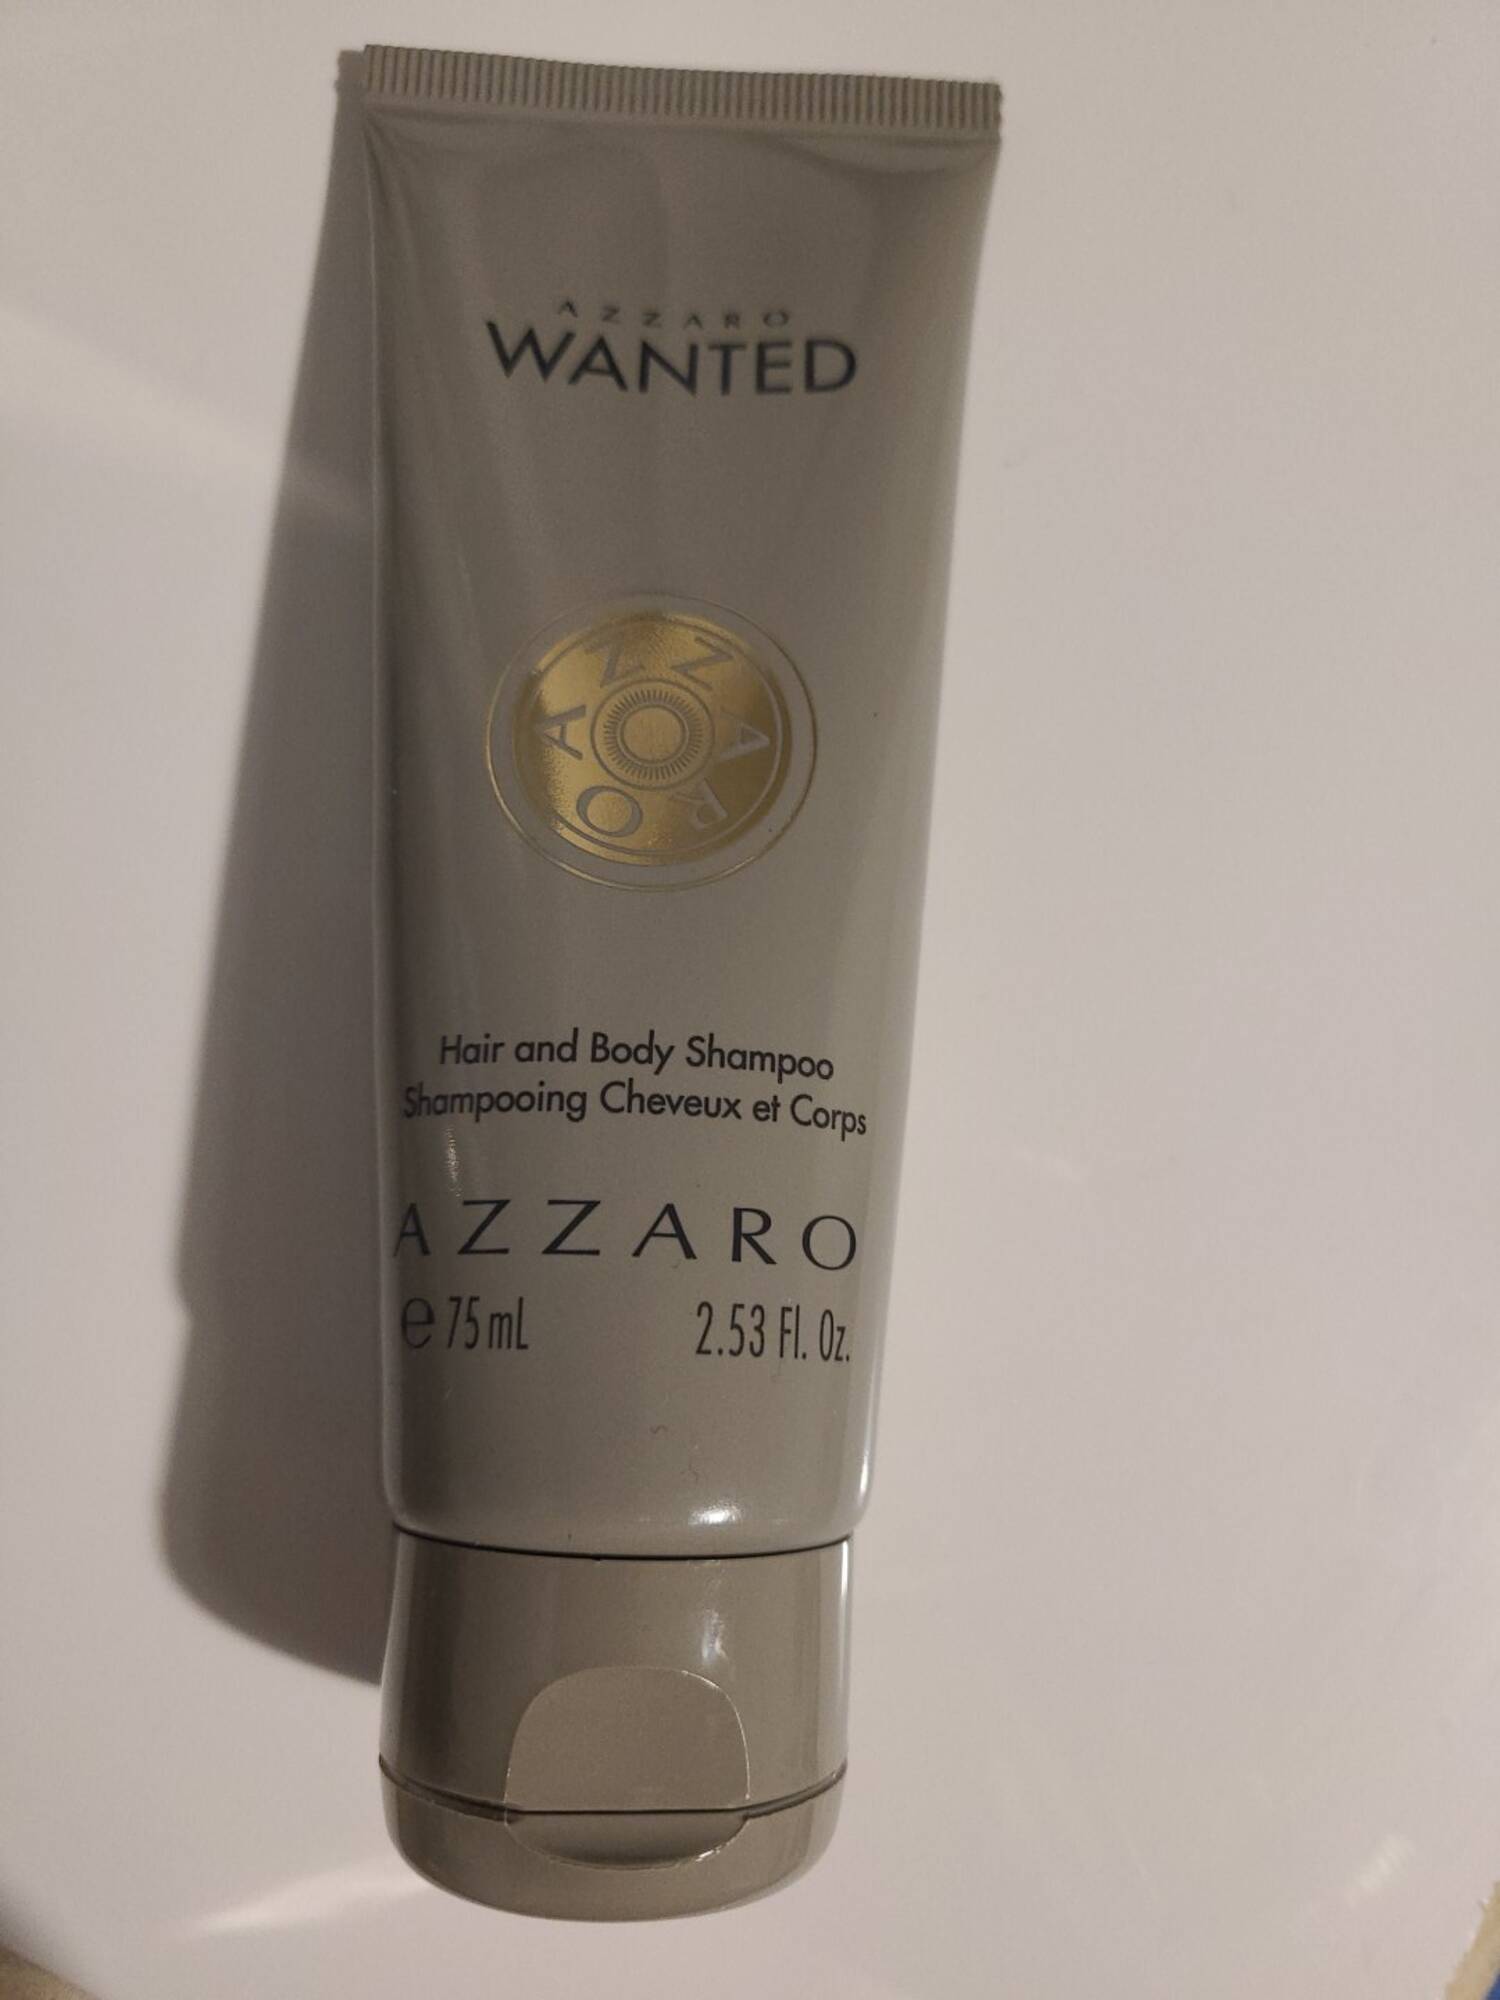 AZZARO - Shampooing cheveux et corps  